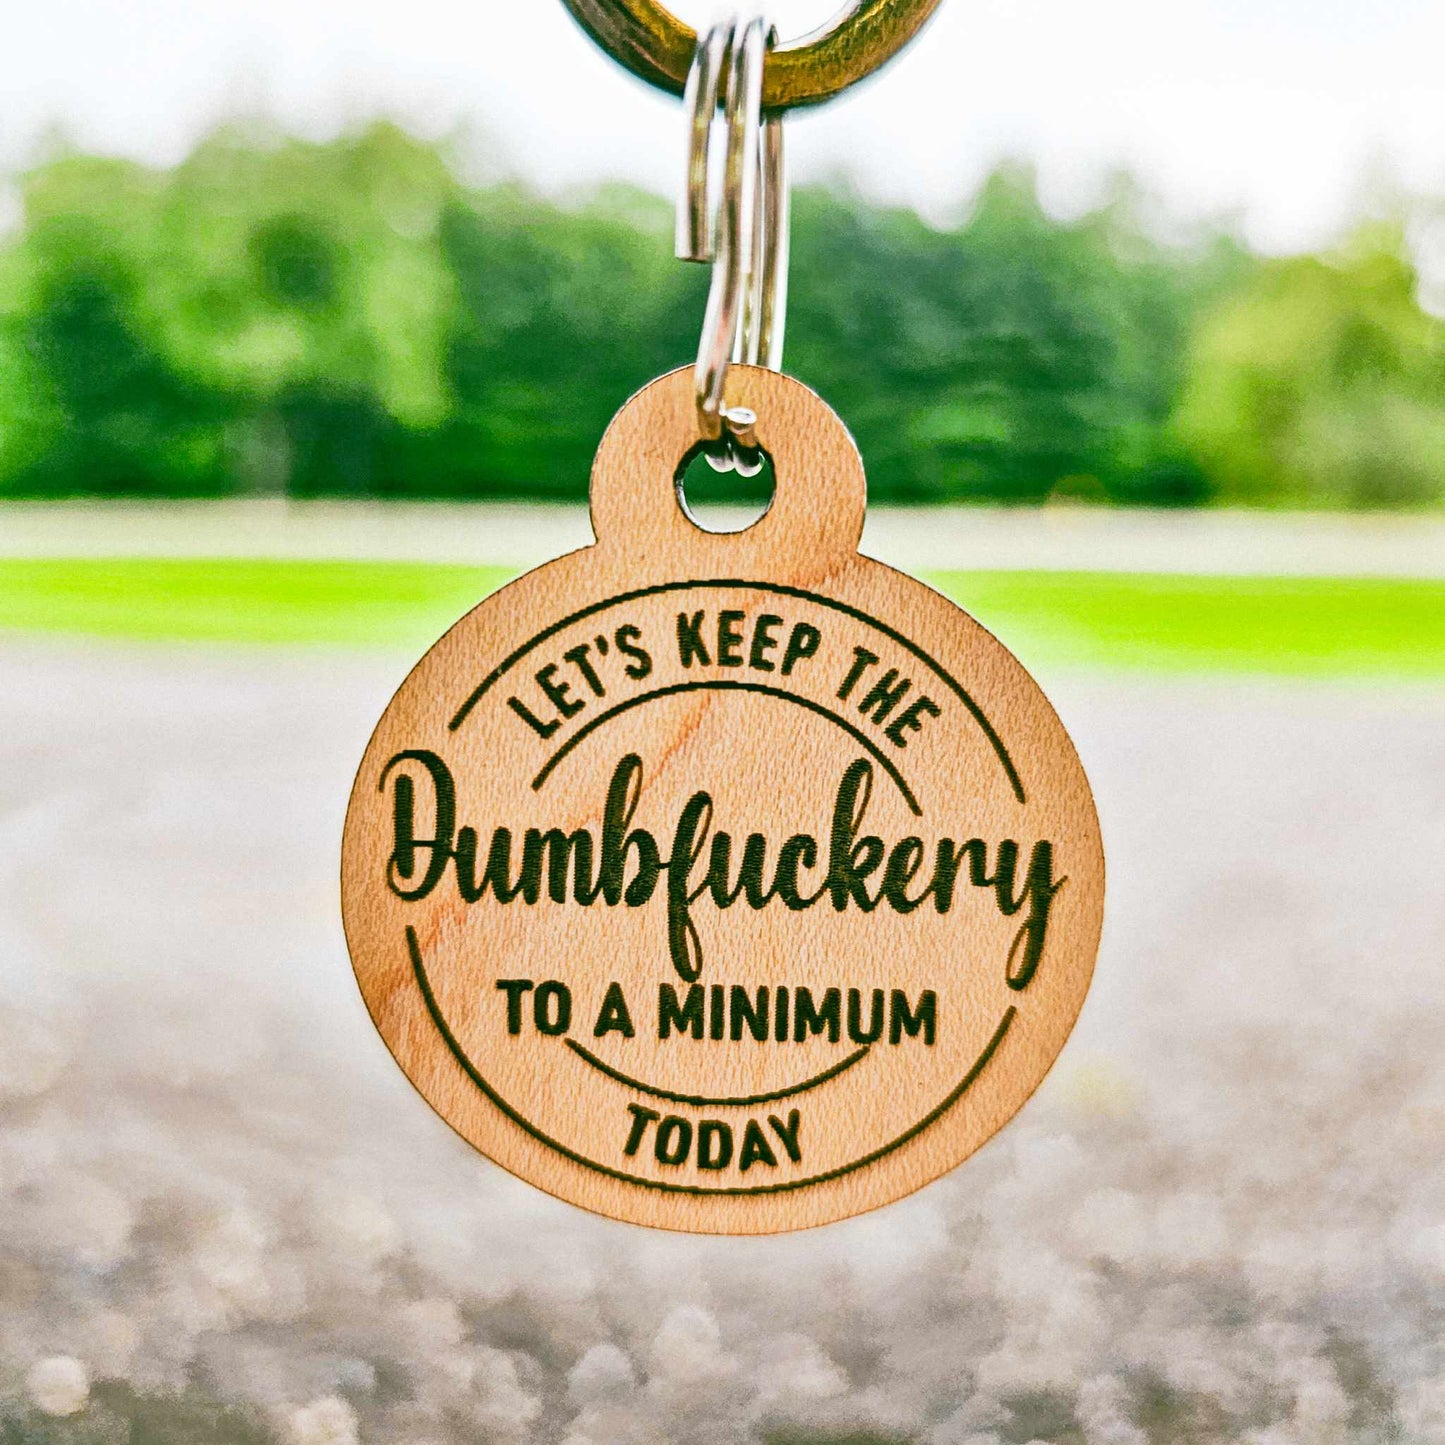 Let's Keep The Dumbfuckery To A Minimum Today Keychain